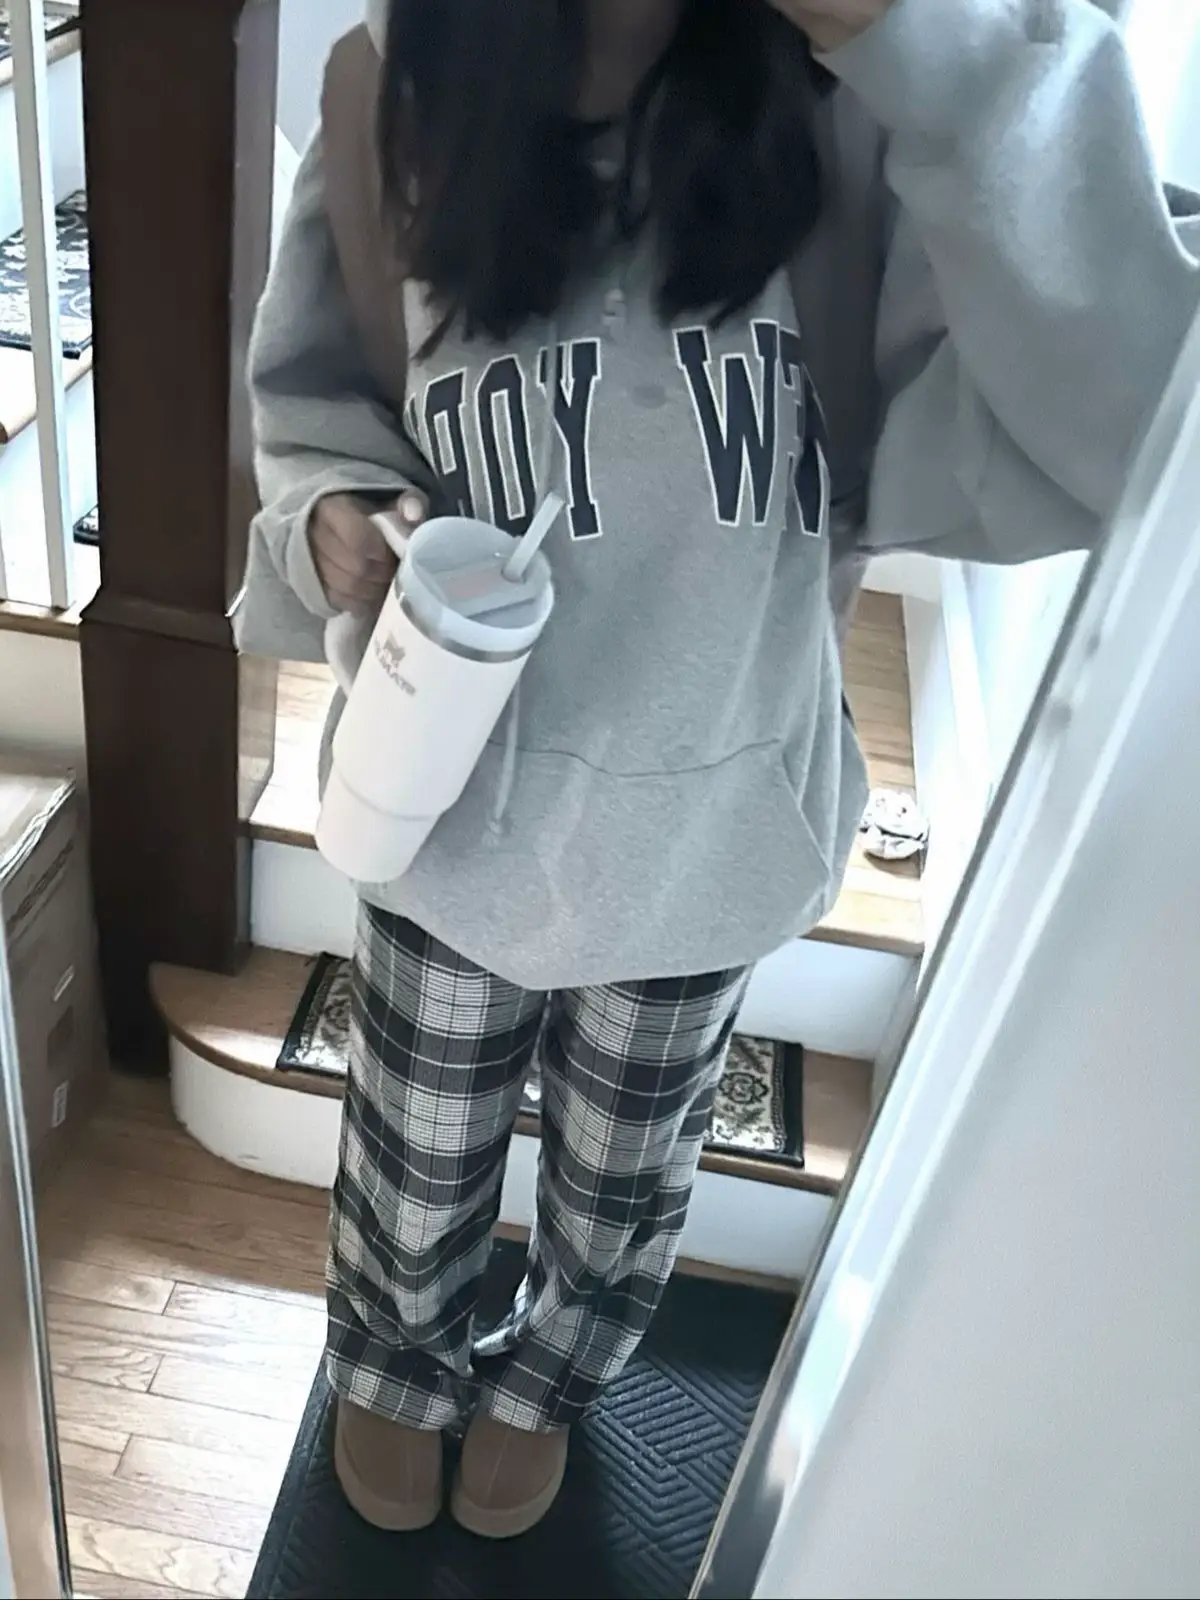 9+ Trendy, Yet Cozy Grey Sweatpants Outfits To Wear  Layering outfits,  Gray sweatpants outfit, Sweatpants outfits